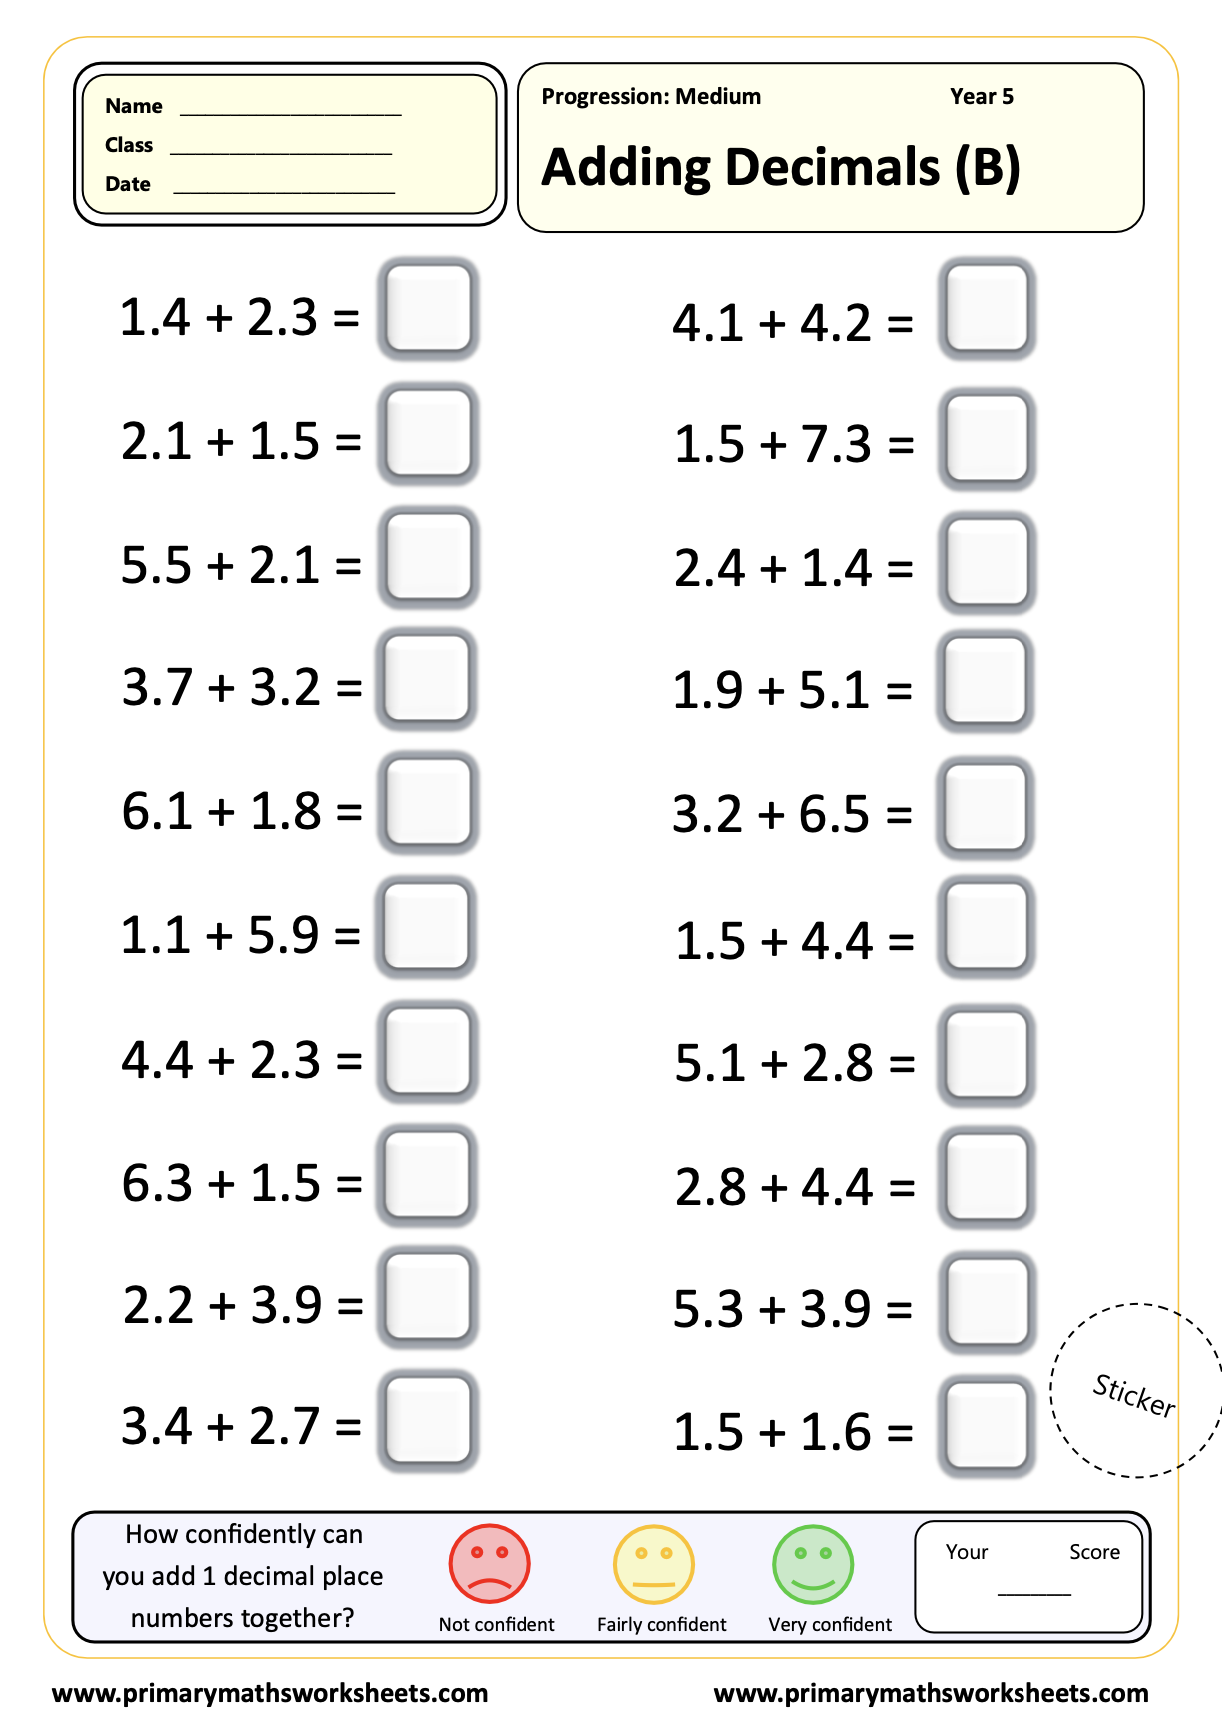 Year 5 Addition Worksheets 2